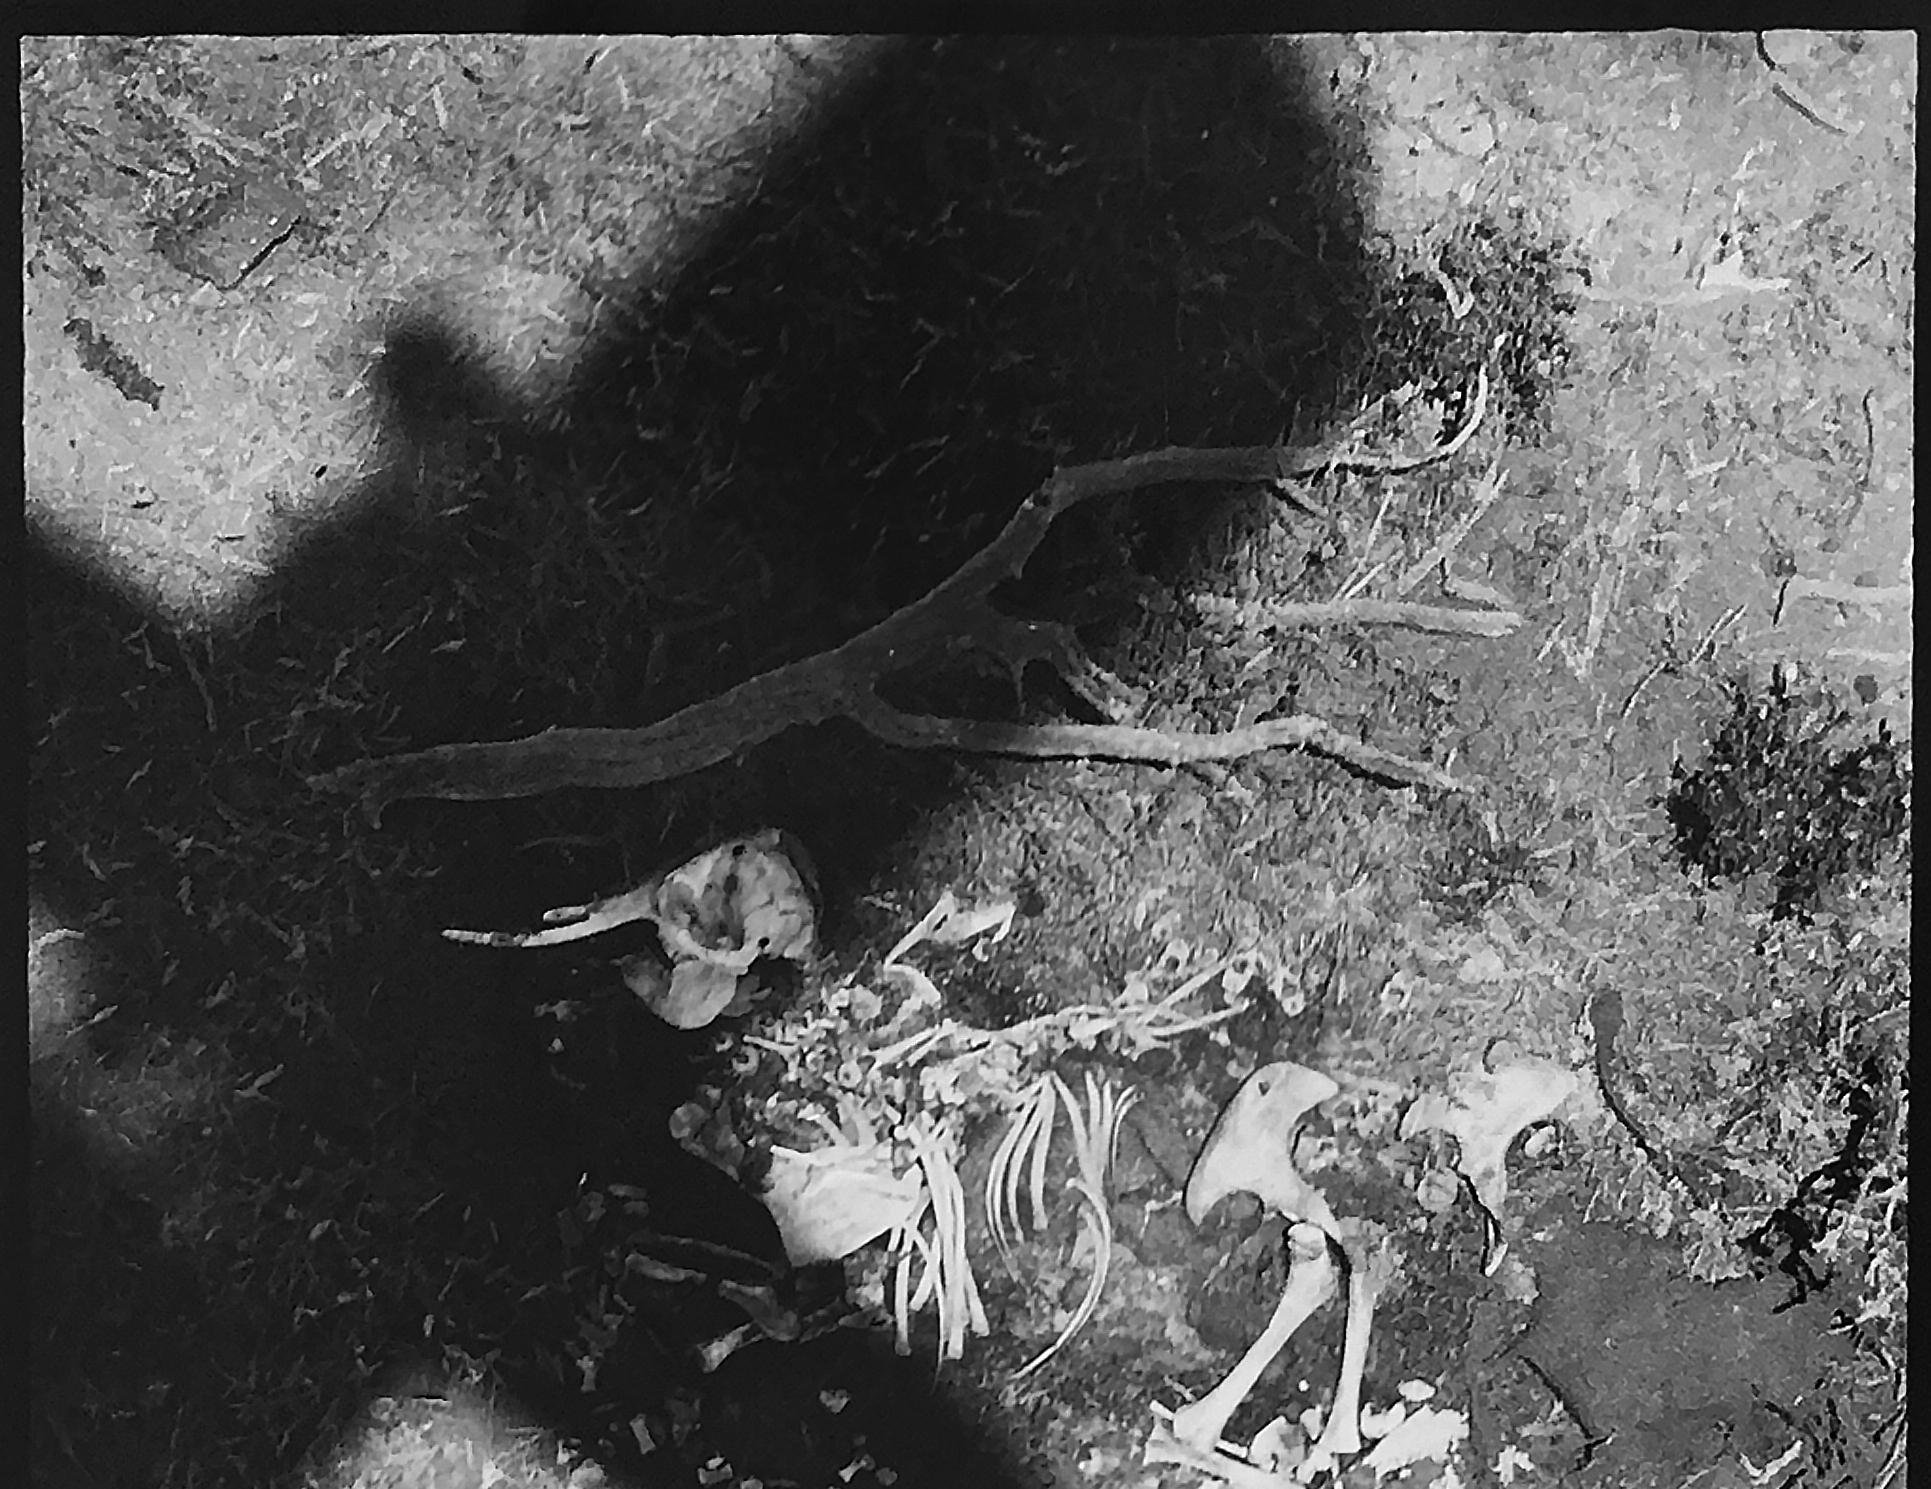 The Death of Elephants in Tsavo Park 1971 - 1972
Peter Beard/Unsigned
The original photograph unsigned but documented by its inclusion in 